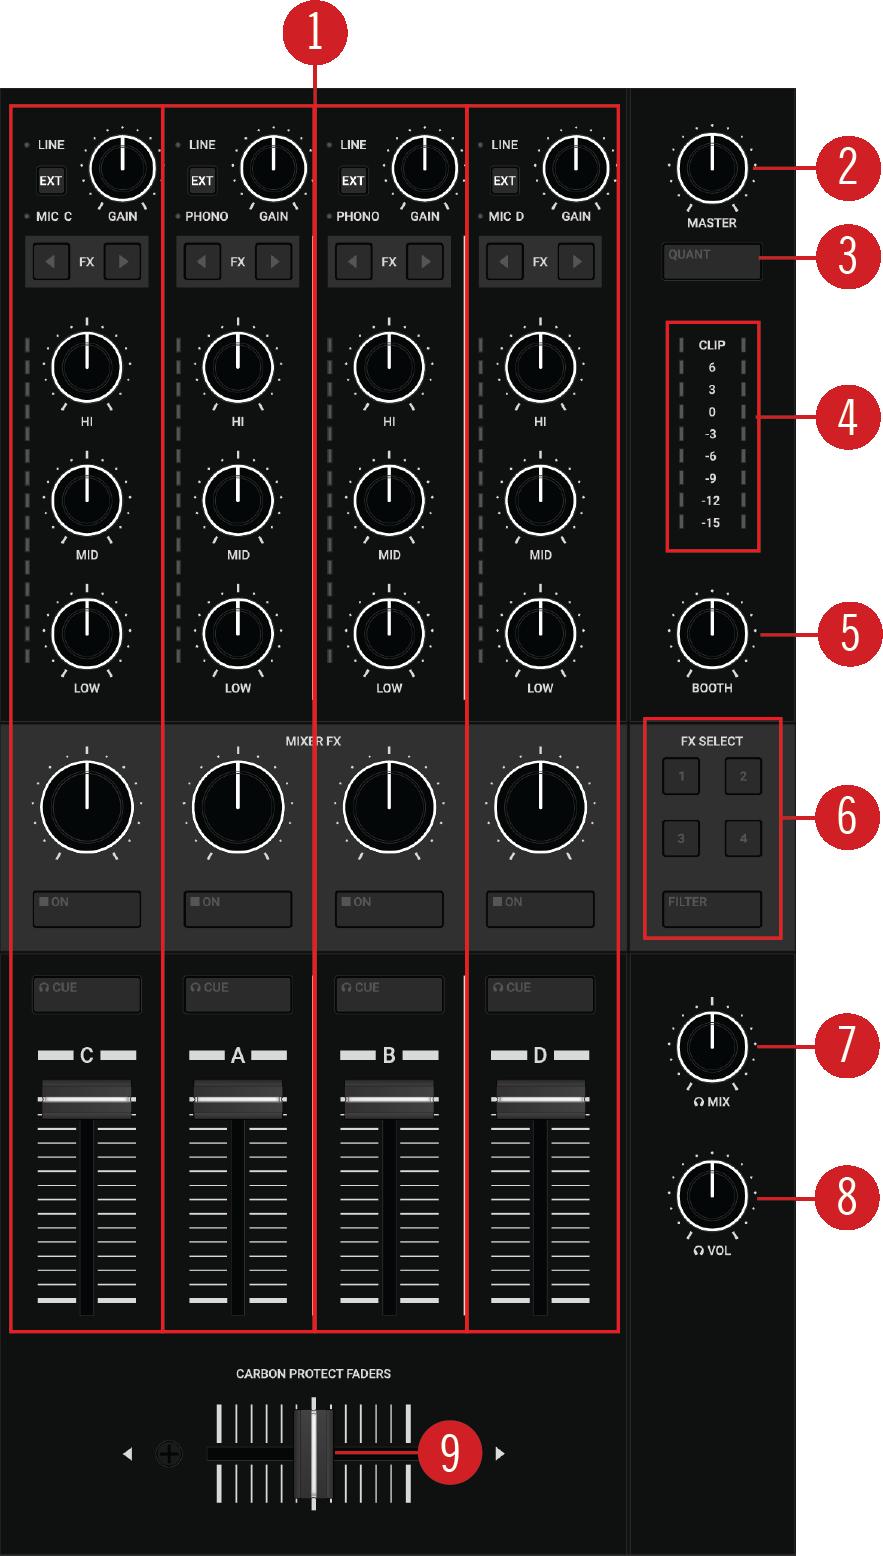 TRAKTOR KONTROL S4 Overview (5) Beat Counter: Represents the current internal Beat Count position of the Remix Deck. Synchronization and Quantize functions are based on this value.